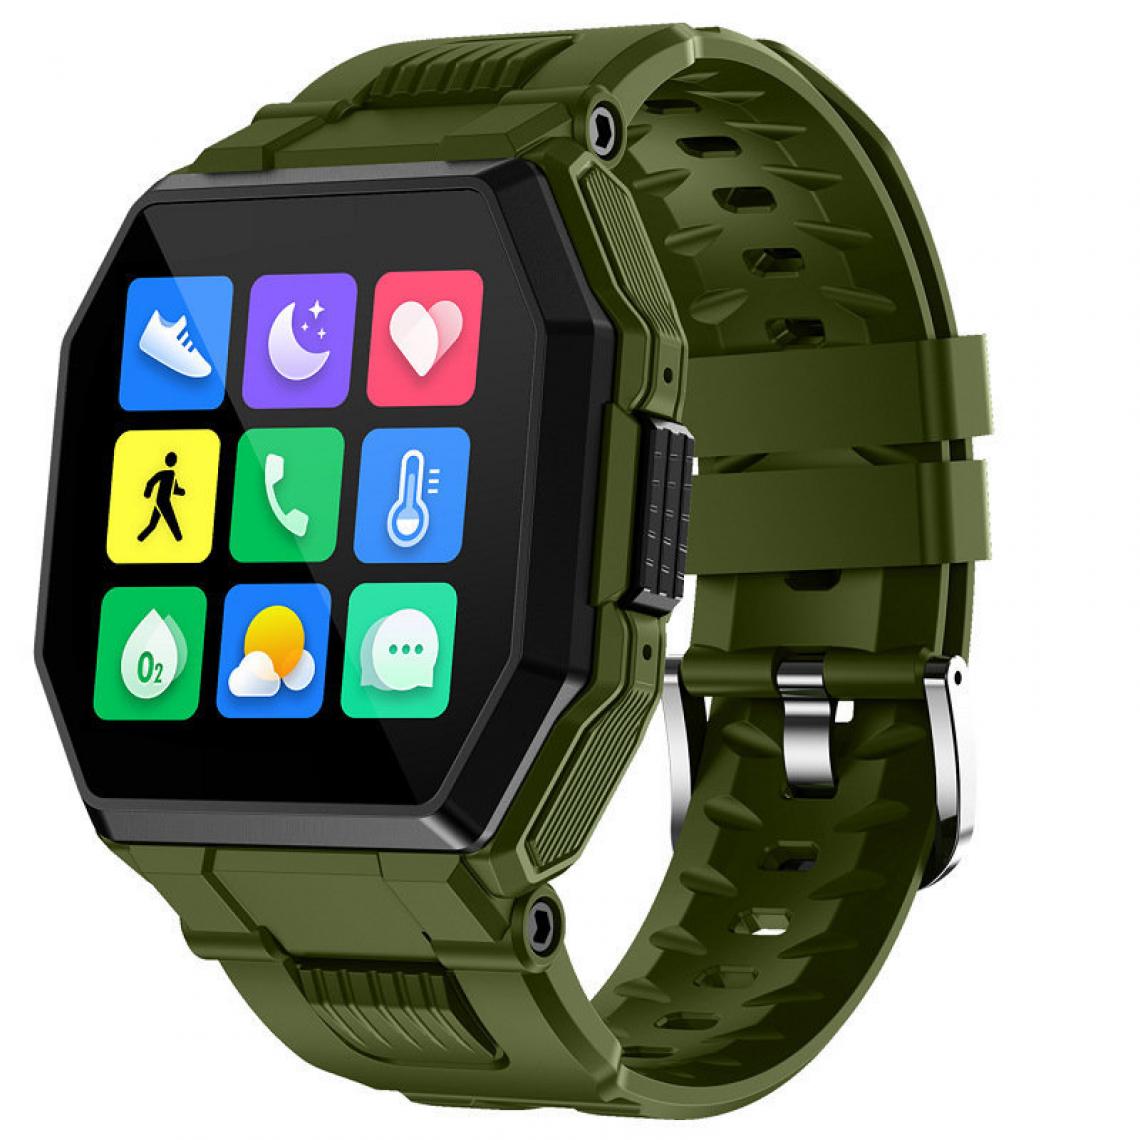 Chronotech Montres - Smart Watch Band Tracker Watch S9 Call Wristwatch Full Touch Sports Fitness Tracker Smartwatch Blood Pressure Functional Practicality(Green) - Montre connectée